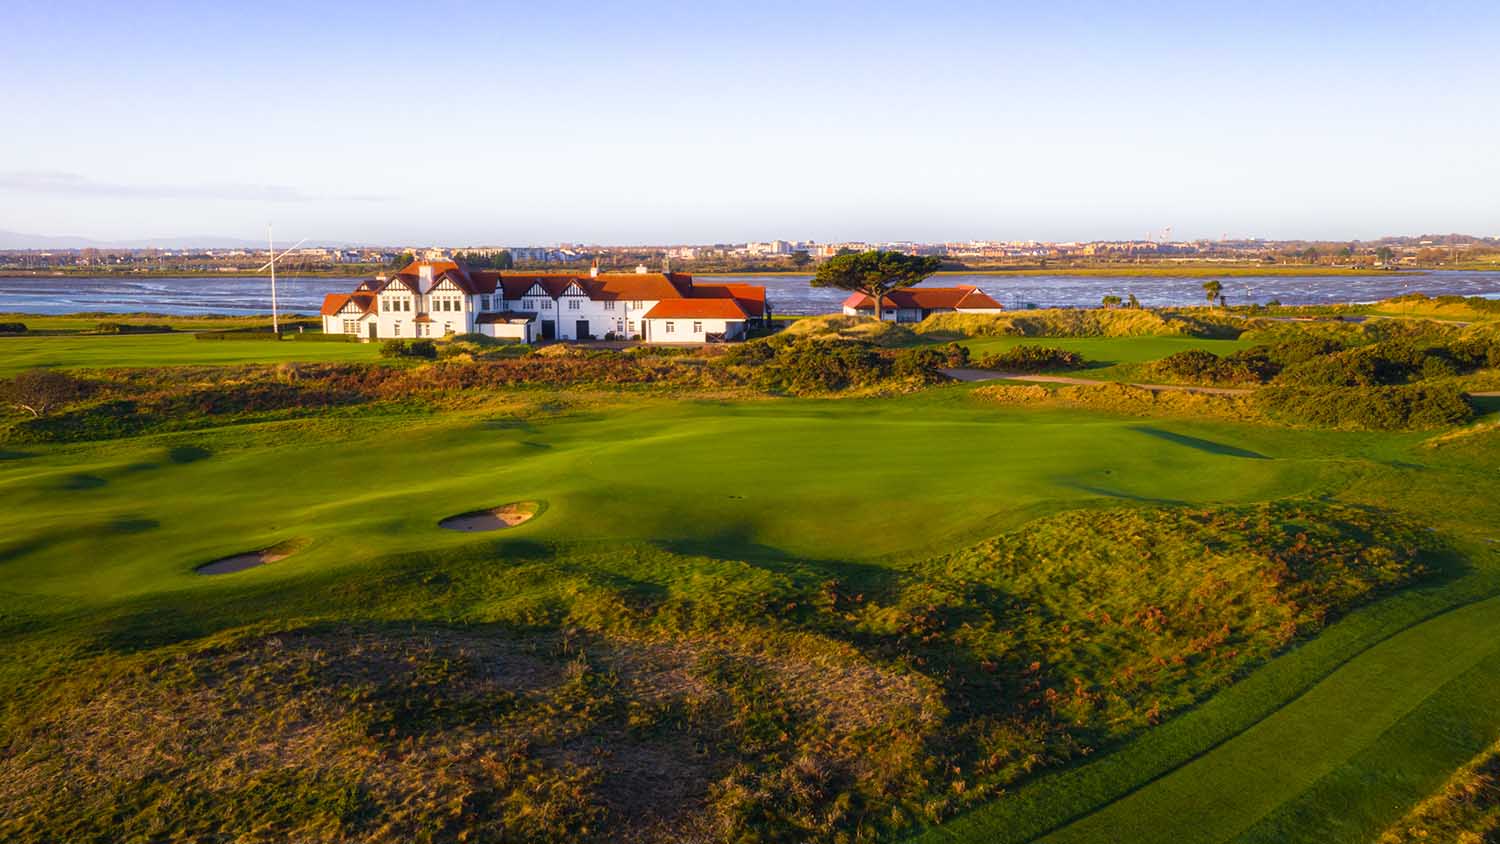 Sovesal diameter Benign 7 Things to See at Portmarnock Golf Club - Ireland Golf Packages